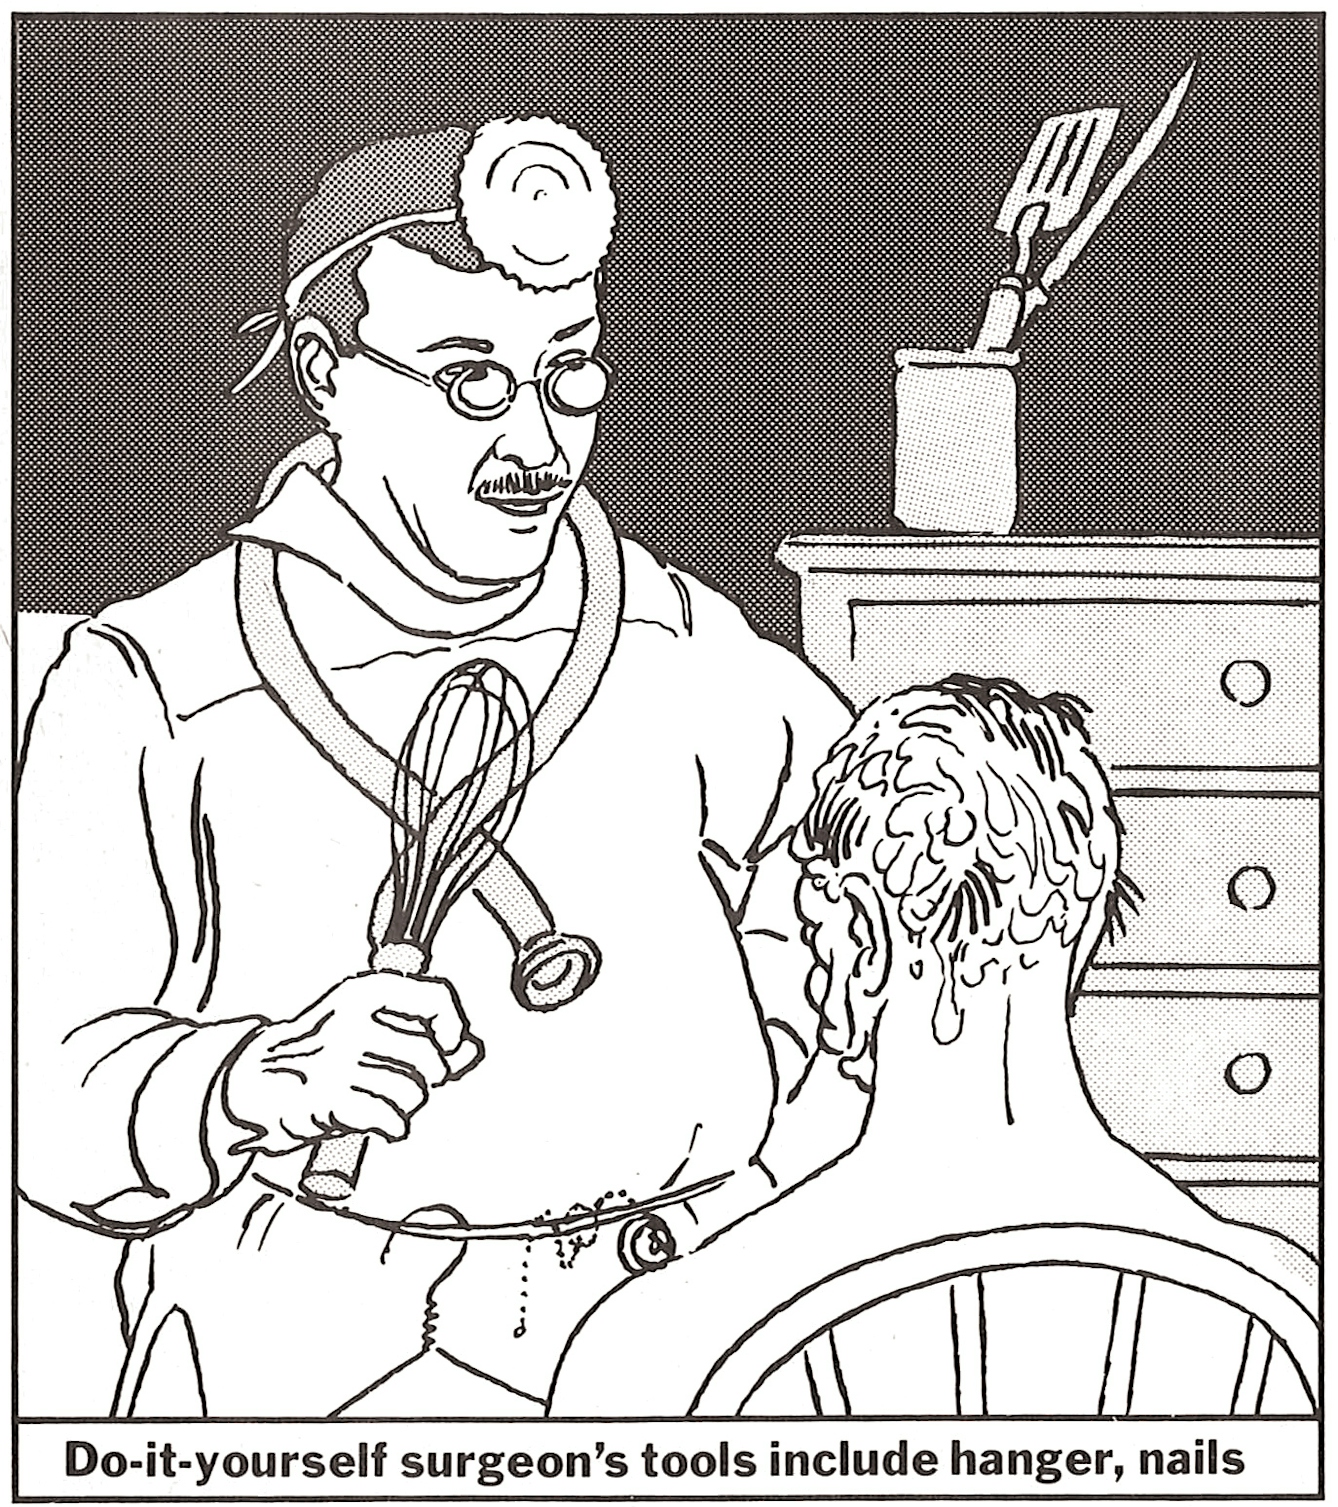 A cartoon of a doctor operating with a kitchen whisk